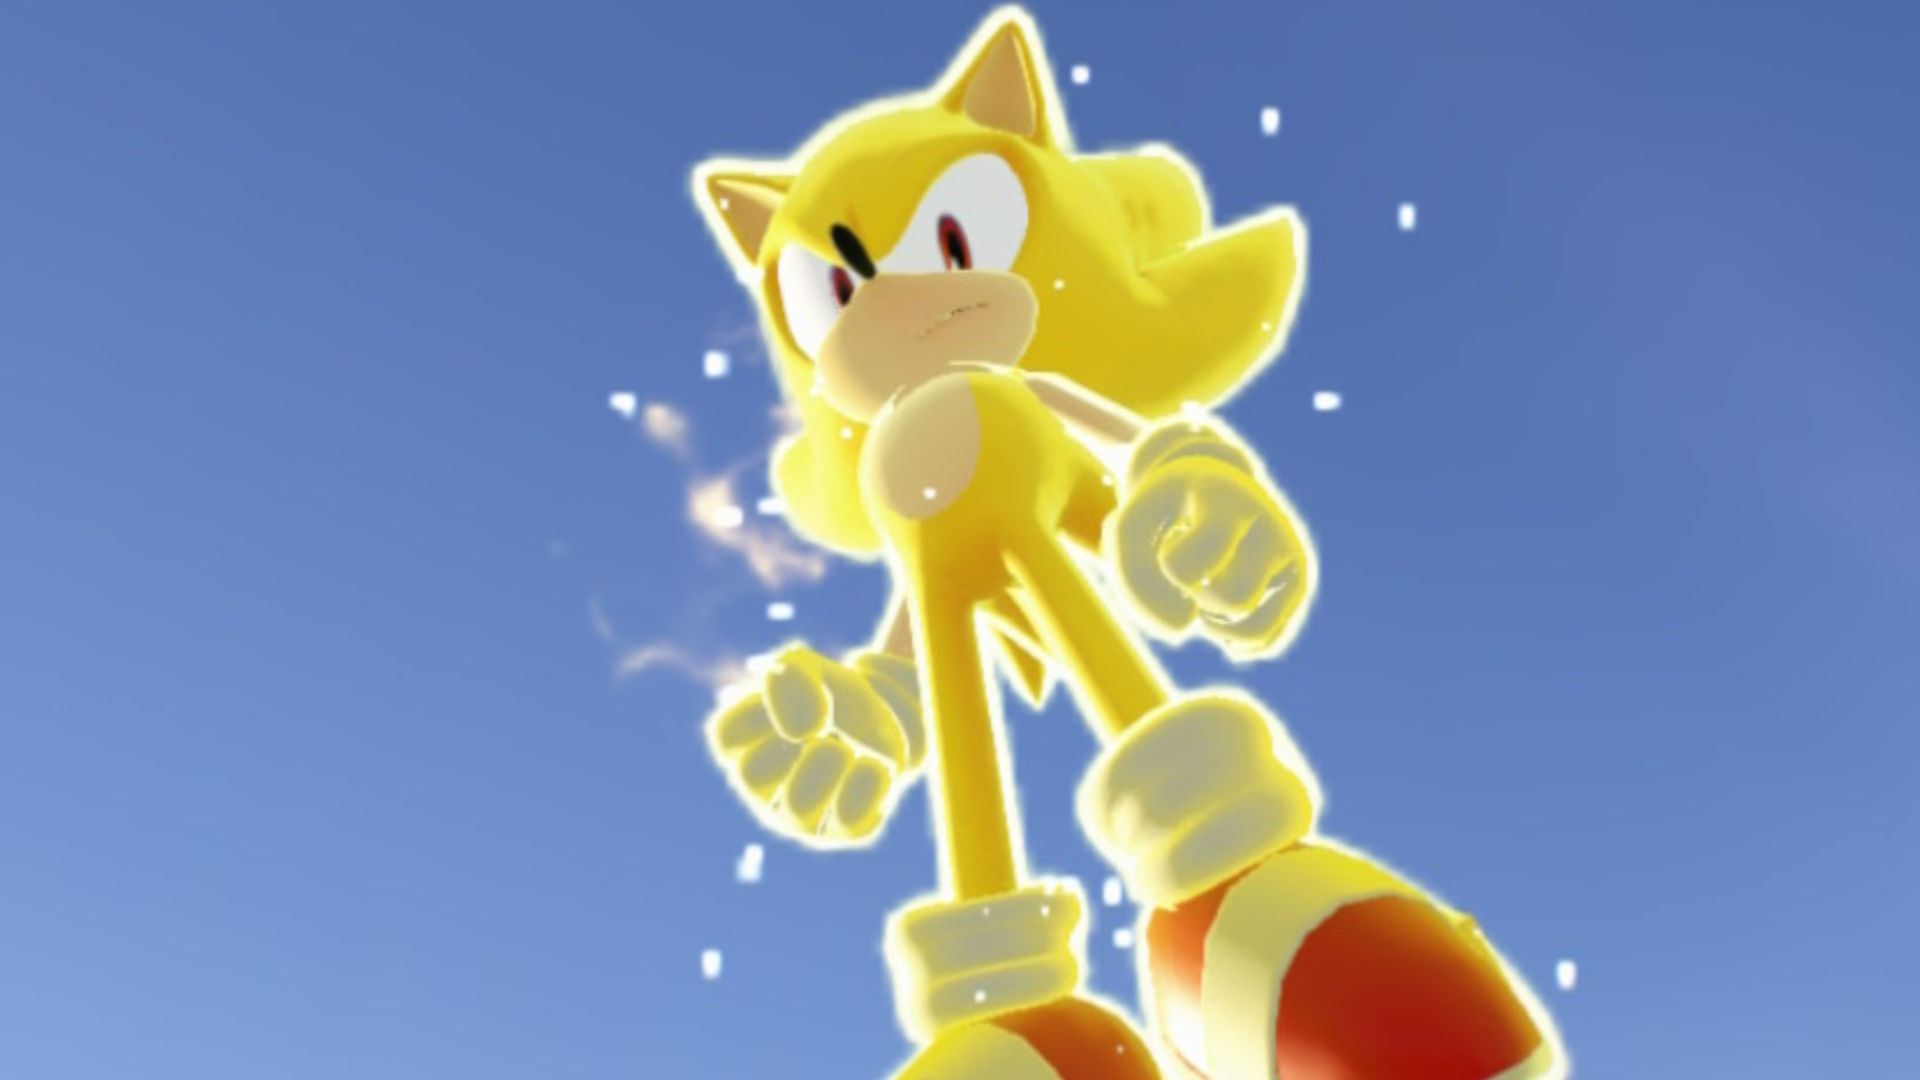 We can look forward to more 2D Sonic games, says Sonic Frontiers